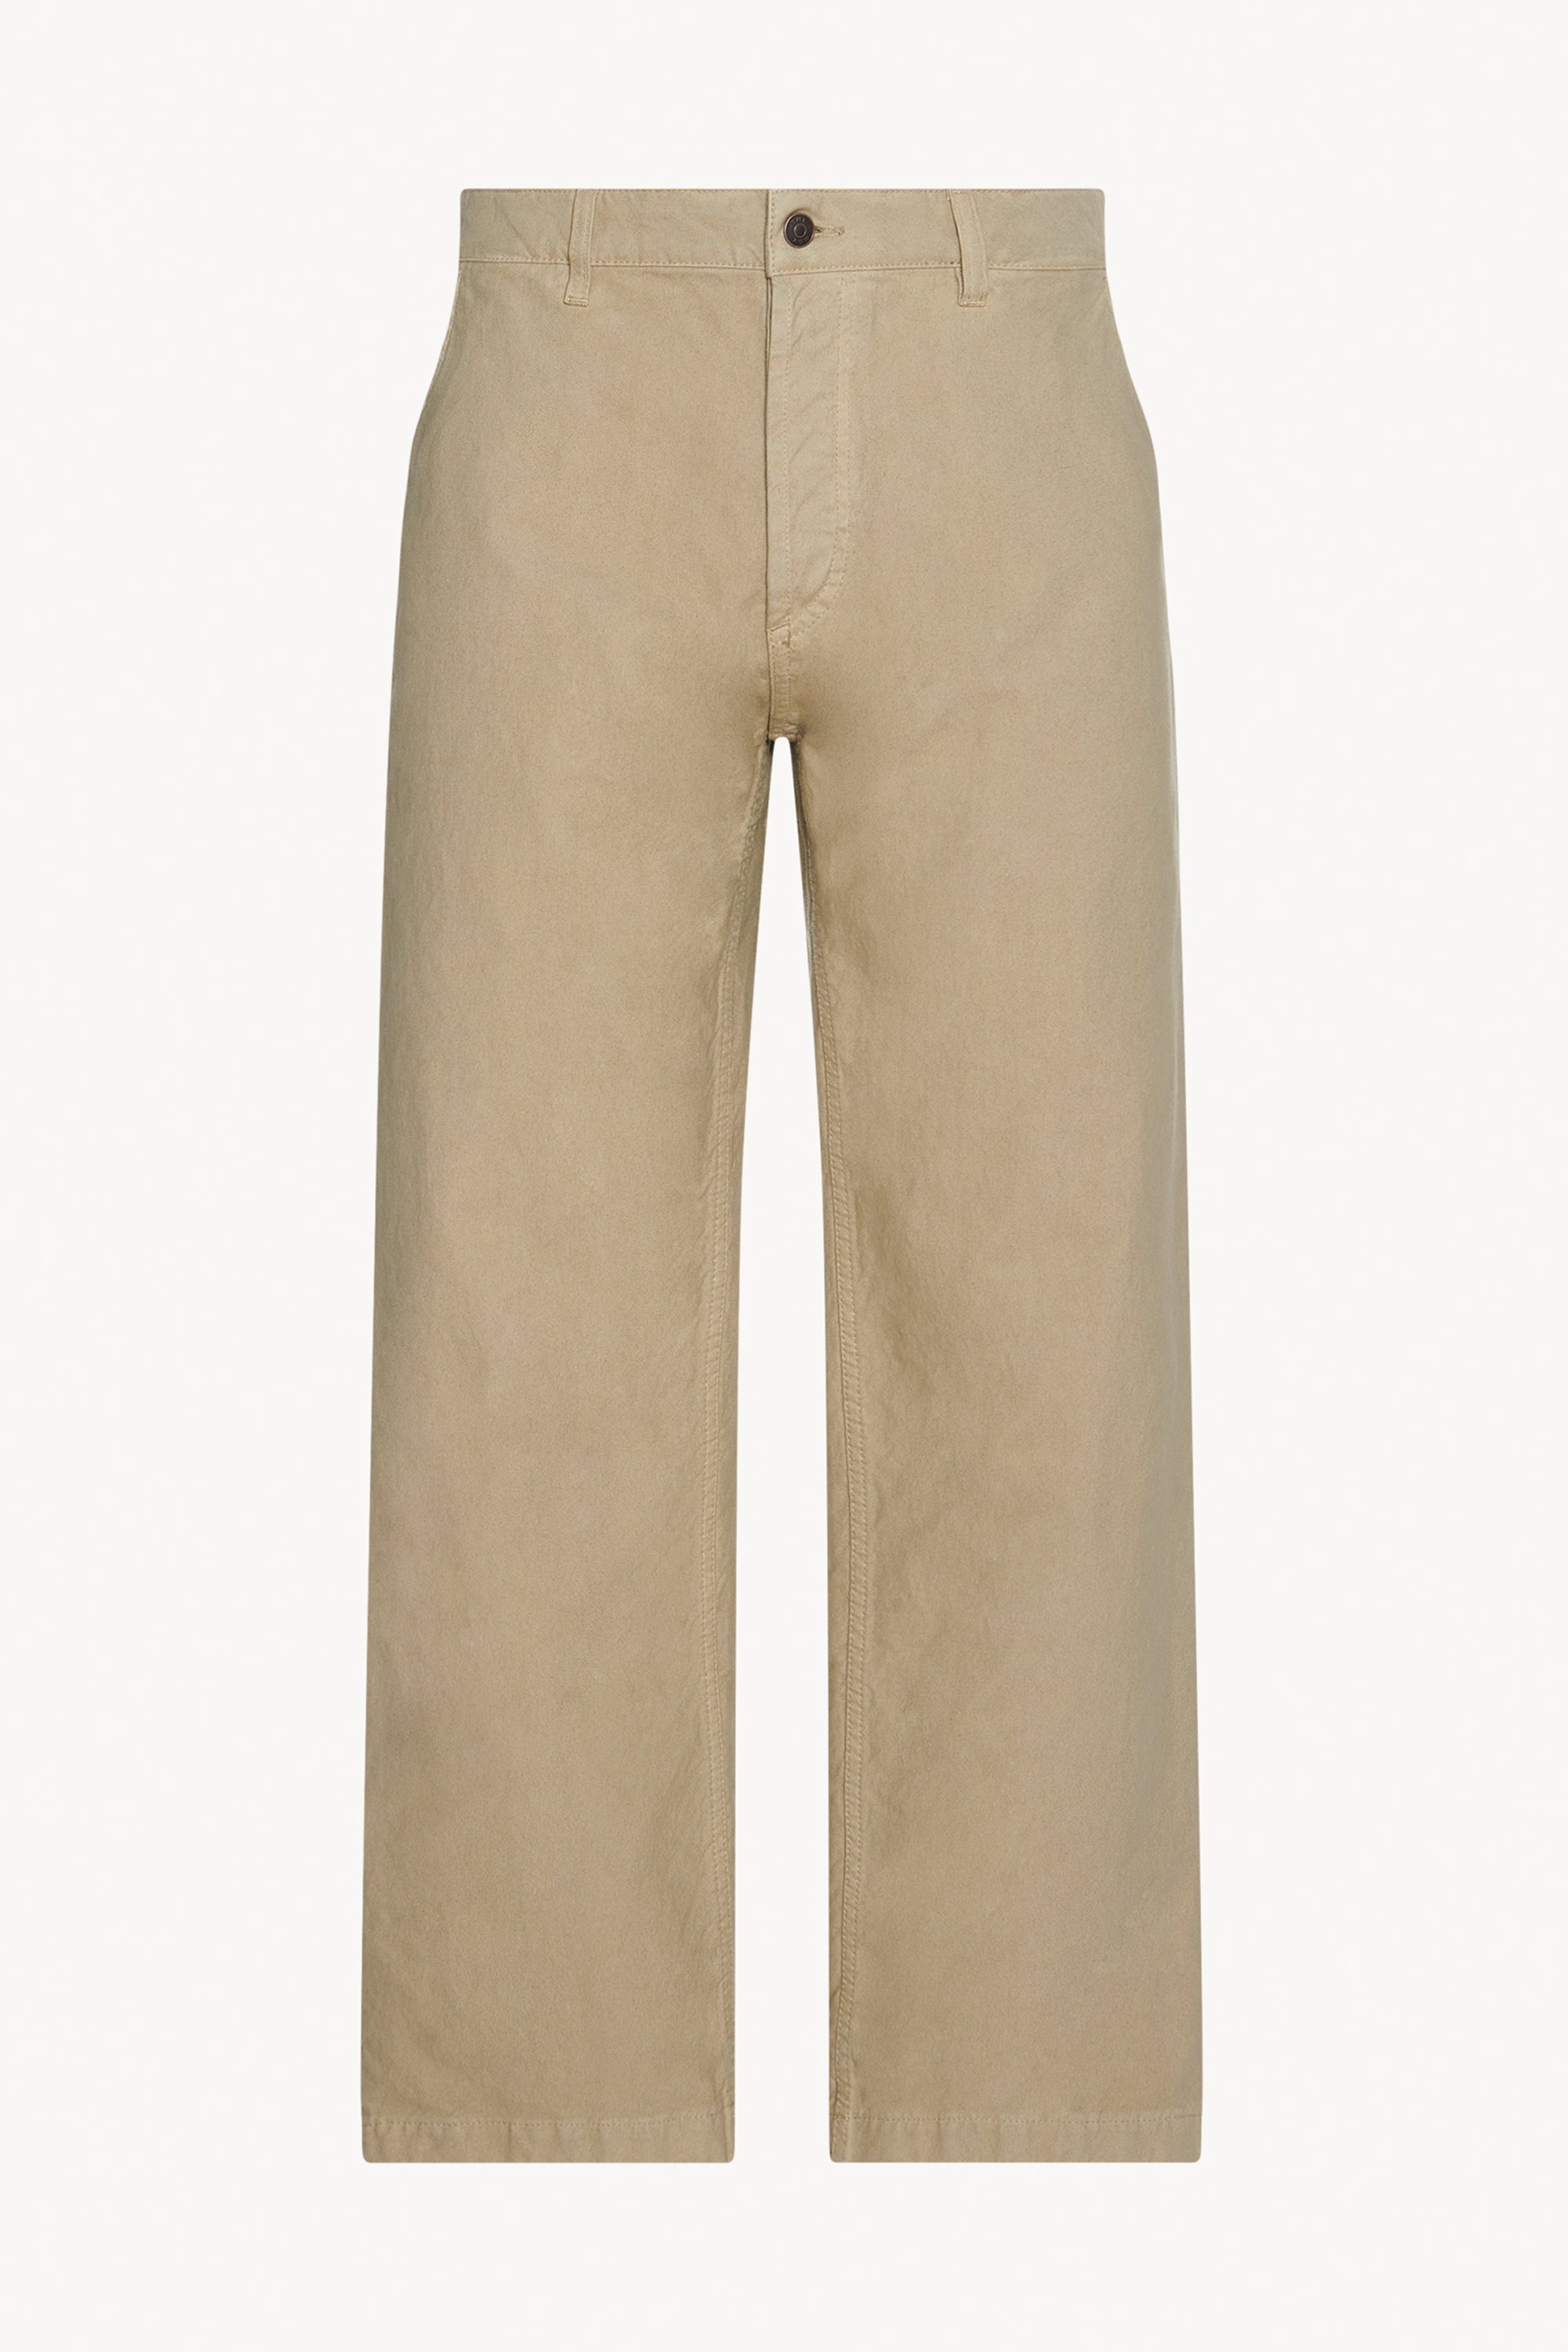 Riggs Pant in Cotton - 1